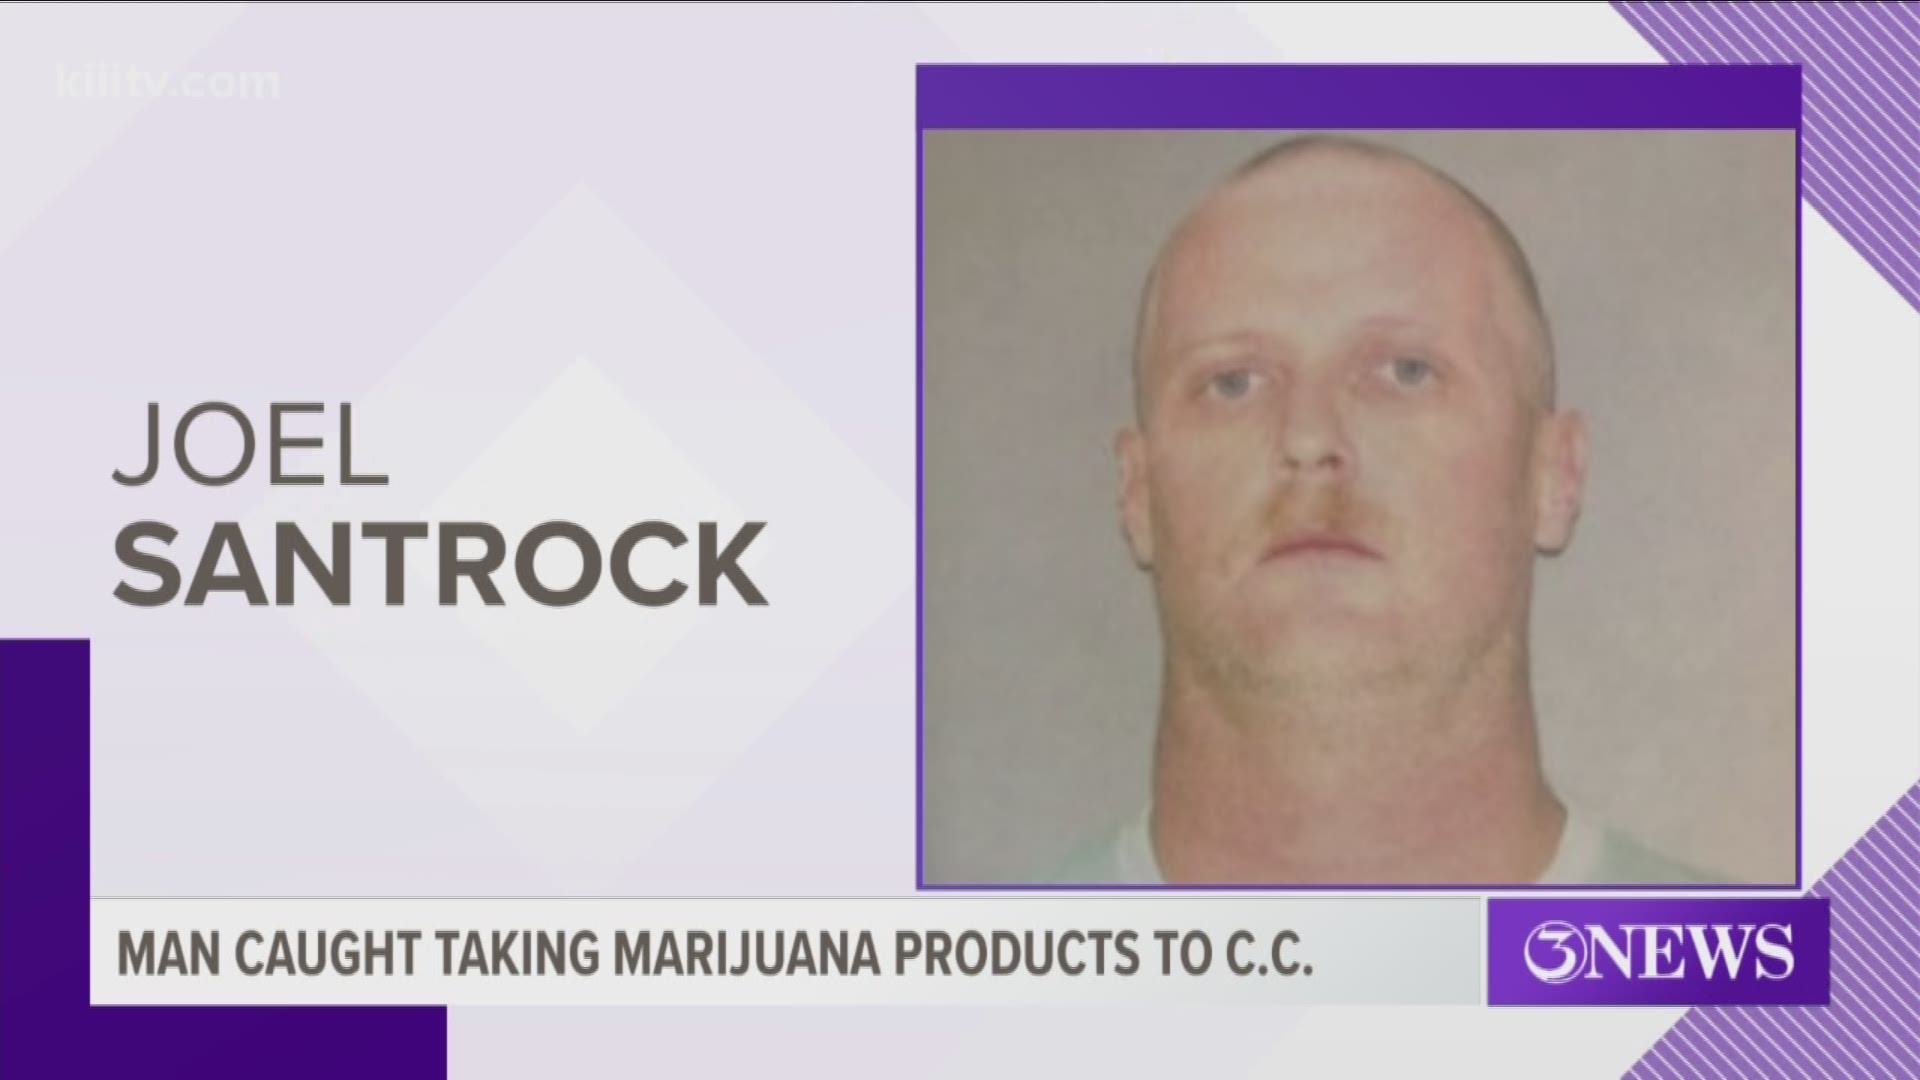 A Corpus Christi man was arrested during a traffic stop Friday in George West, Texas, after a search of his vehicle turned up more than $20,000 of marijuana products